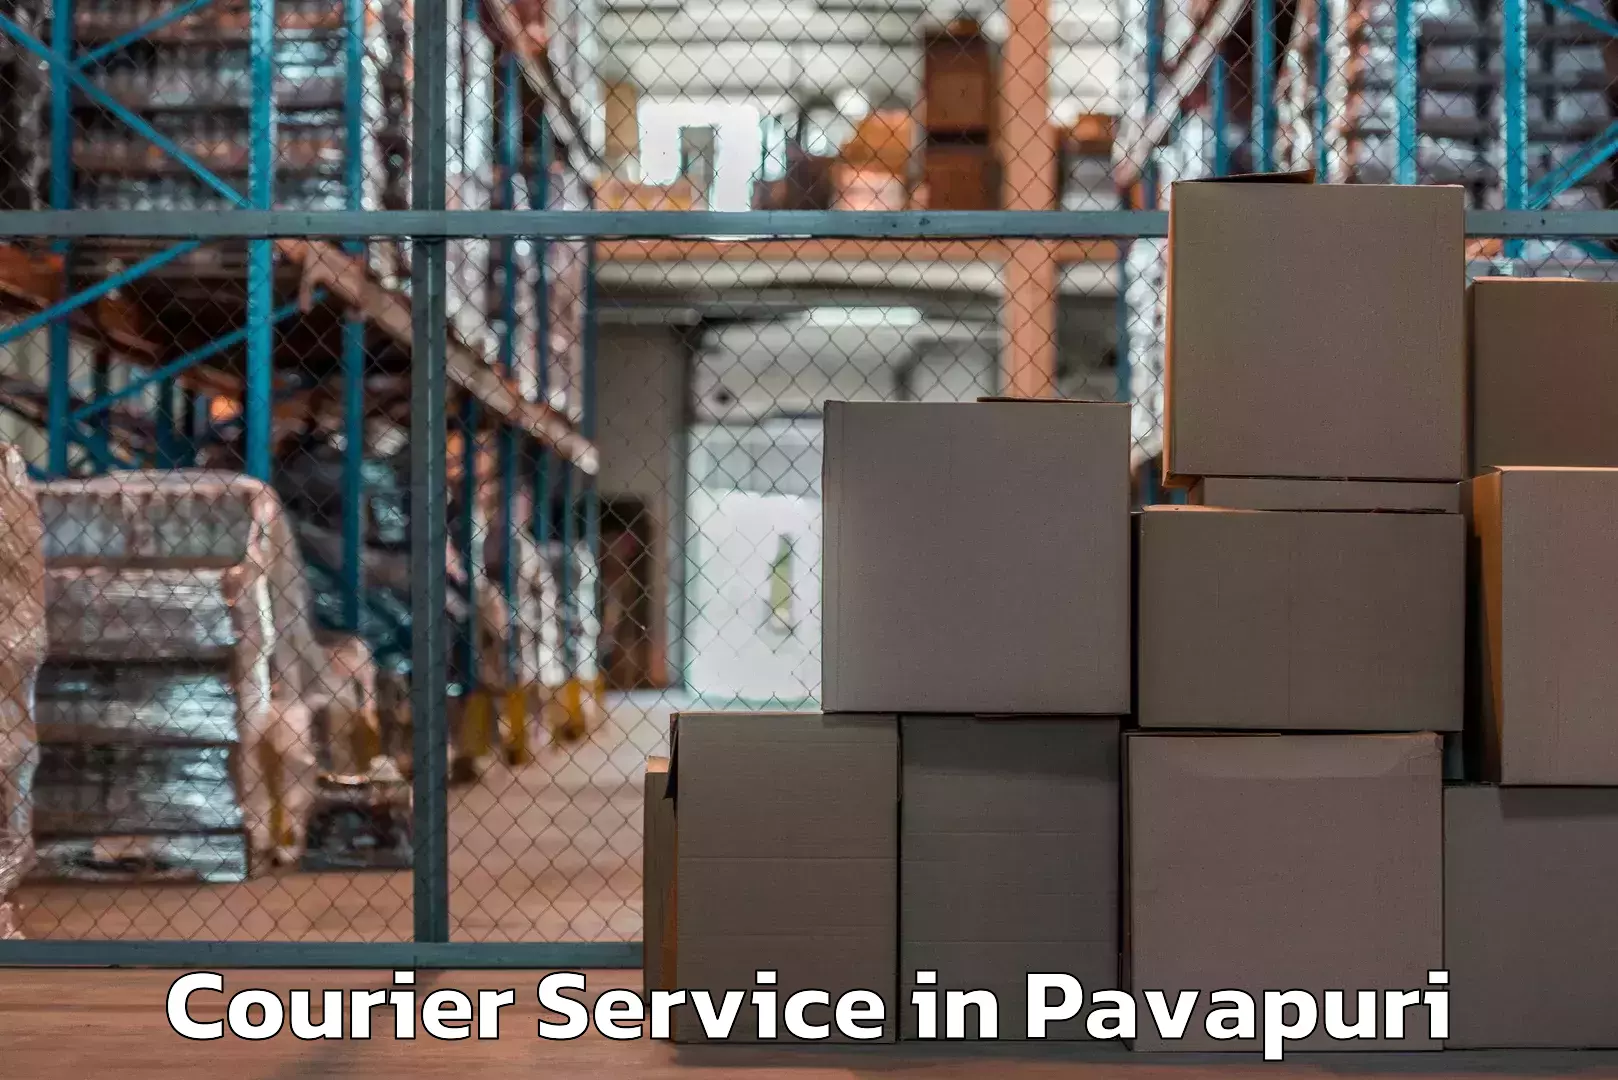 Courier service efficiency in Pavapuri